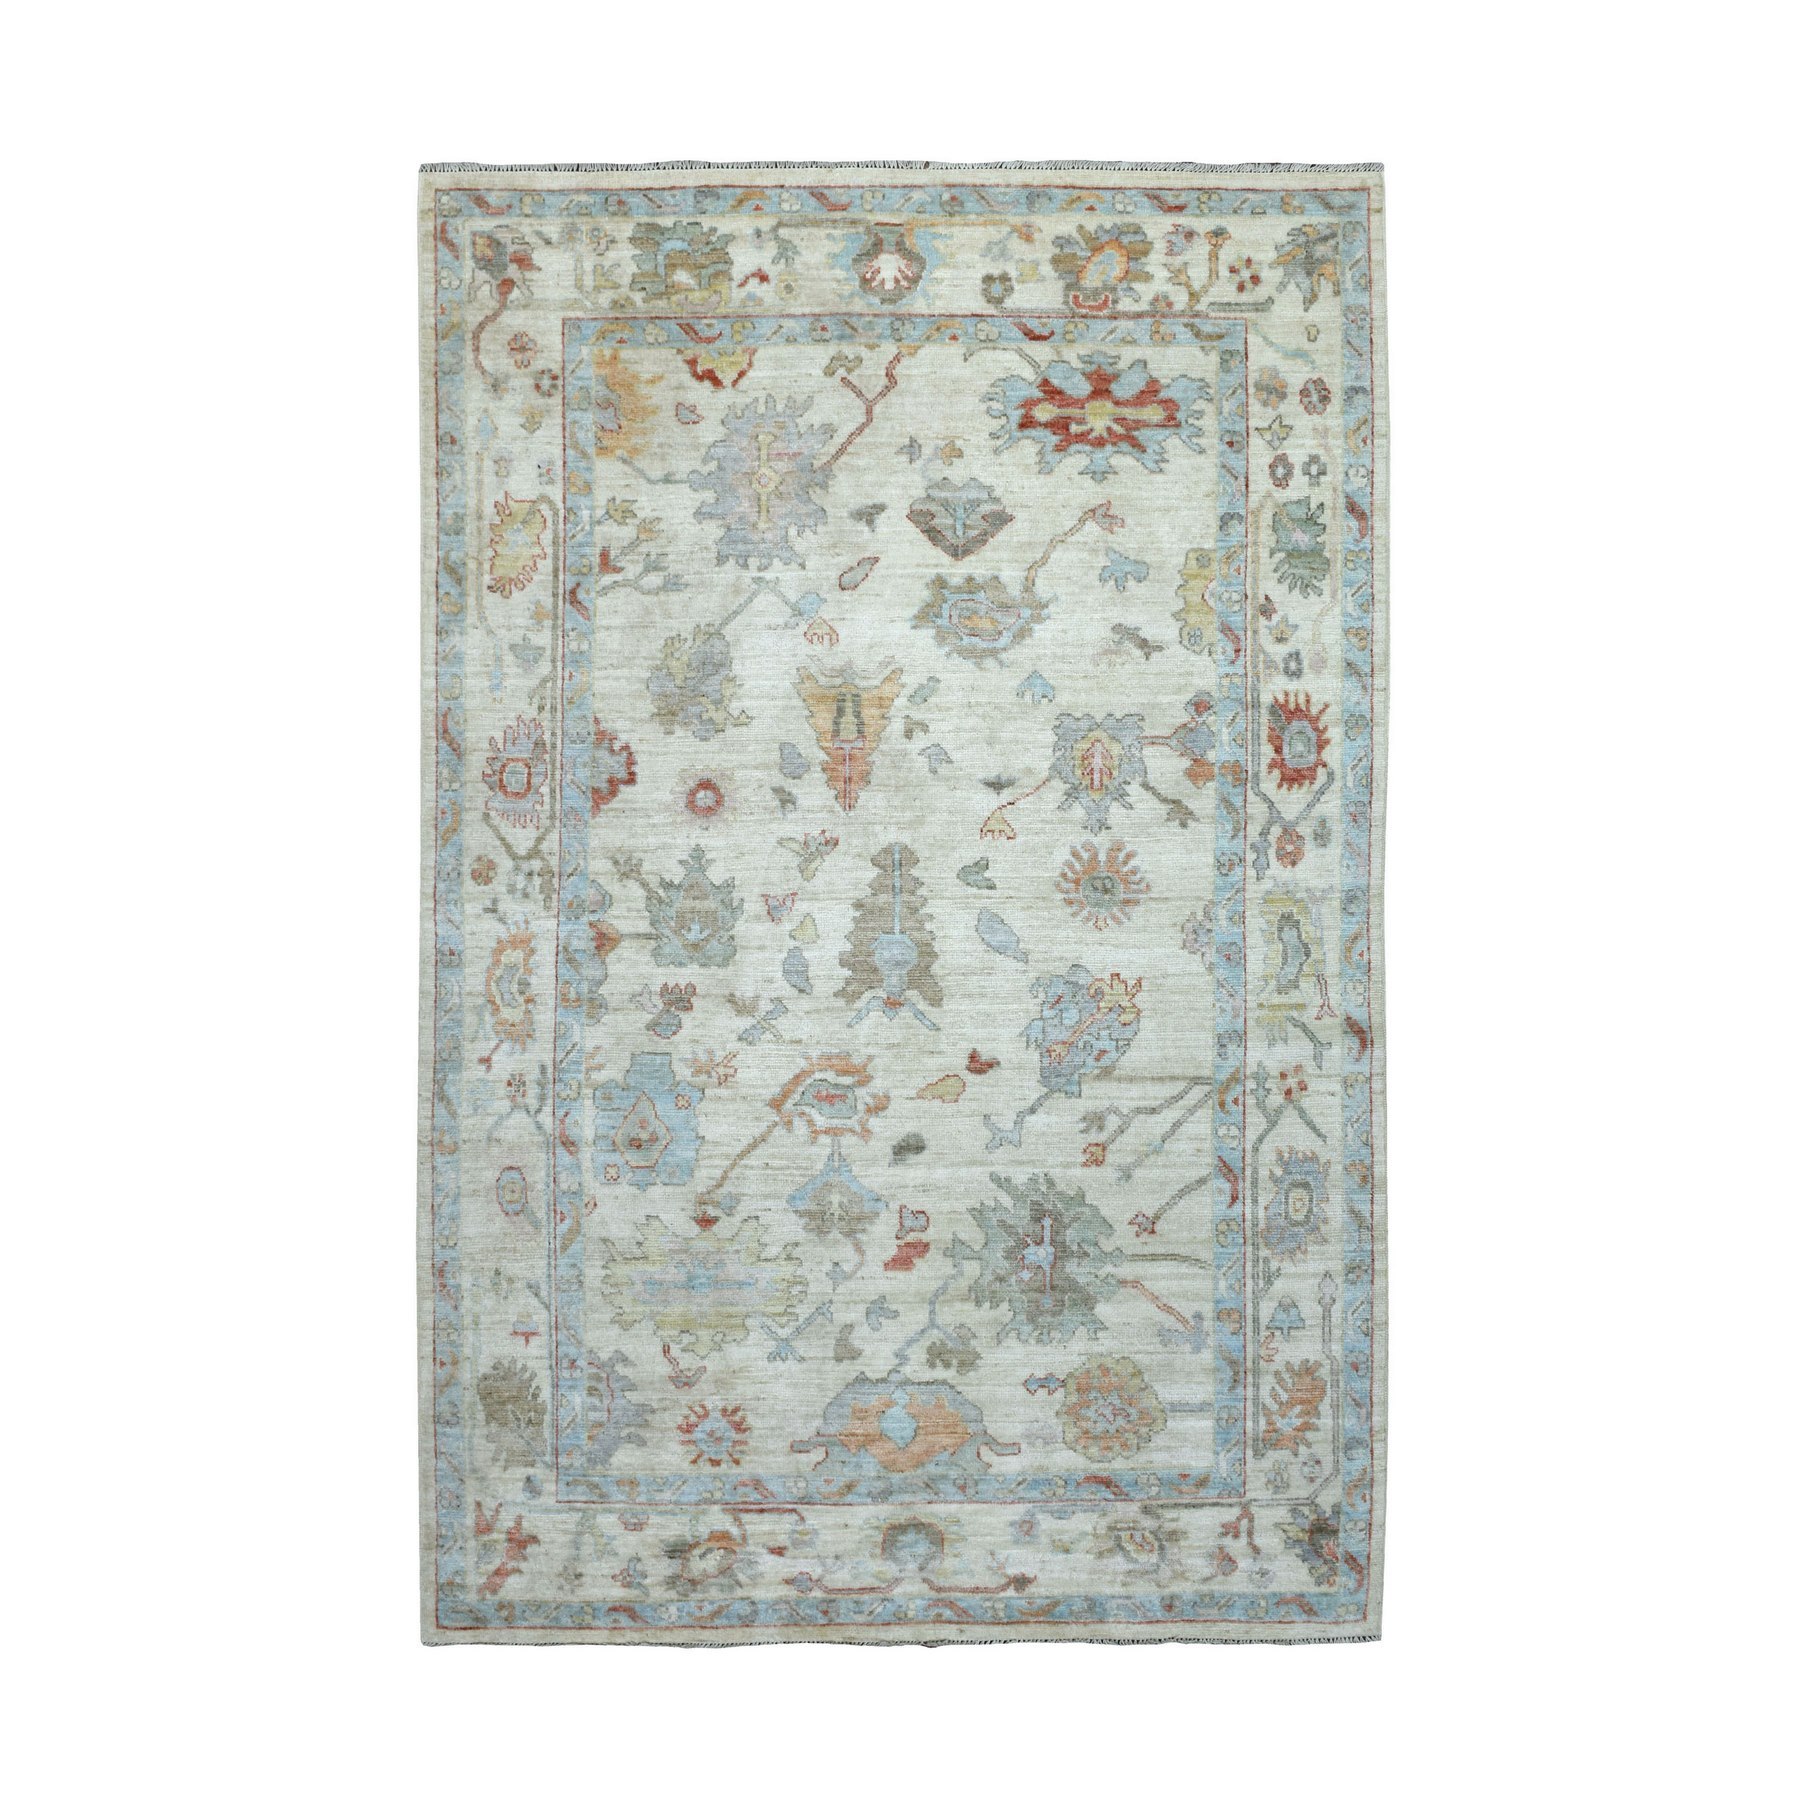 5'10"x9' Organic Wool Hand Woven Ivory Angora Oushak with Bold Floral Pattern Oriental Rug 